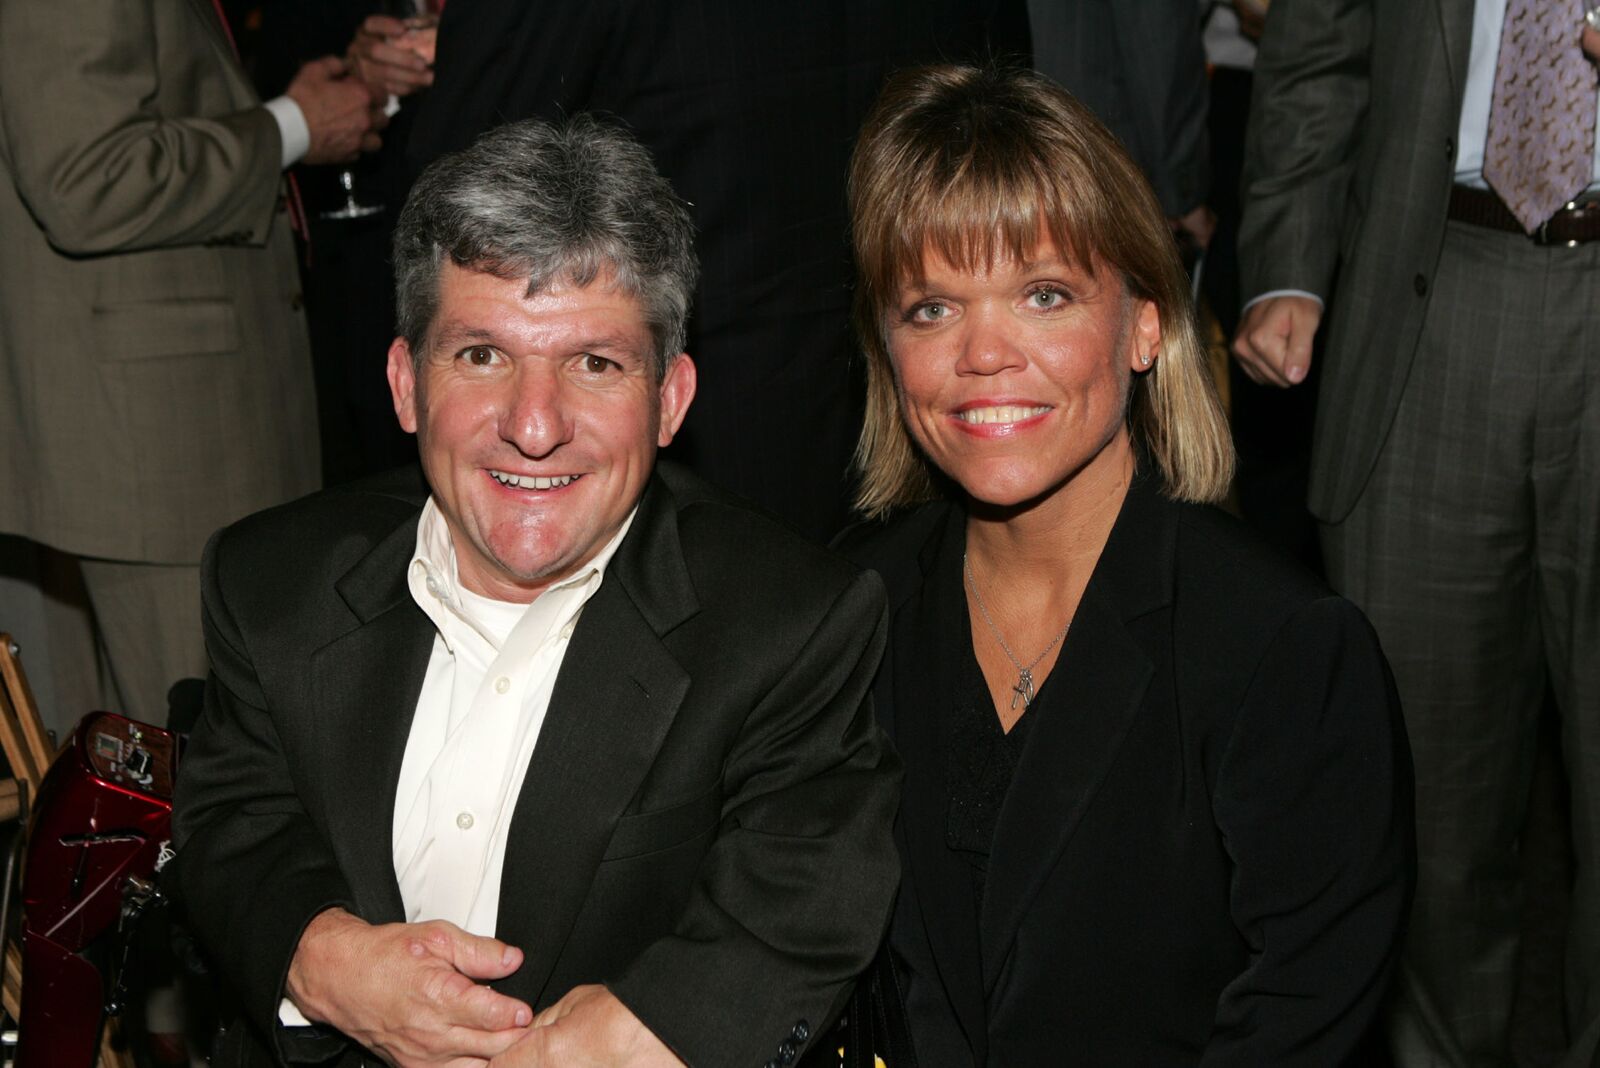 Matt and Amy Roloff attend the Discovery Upfront Presentation NY - Talent Images at the Frederick P. Rose Hall on April 23, 2008. | Photo: Getty Images